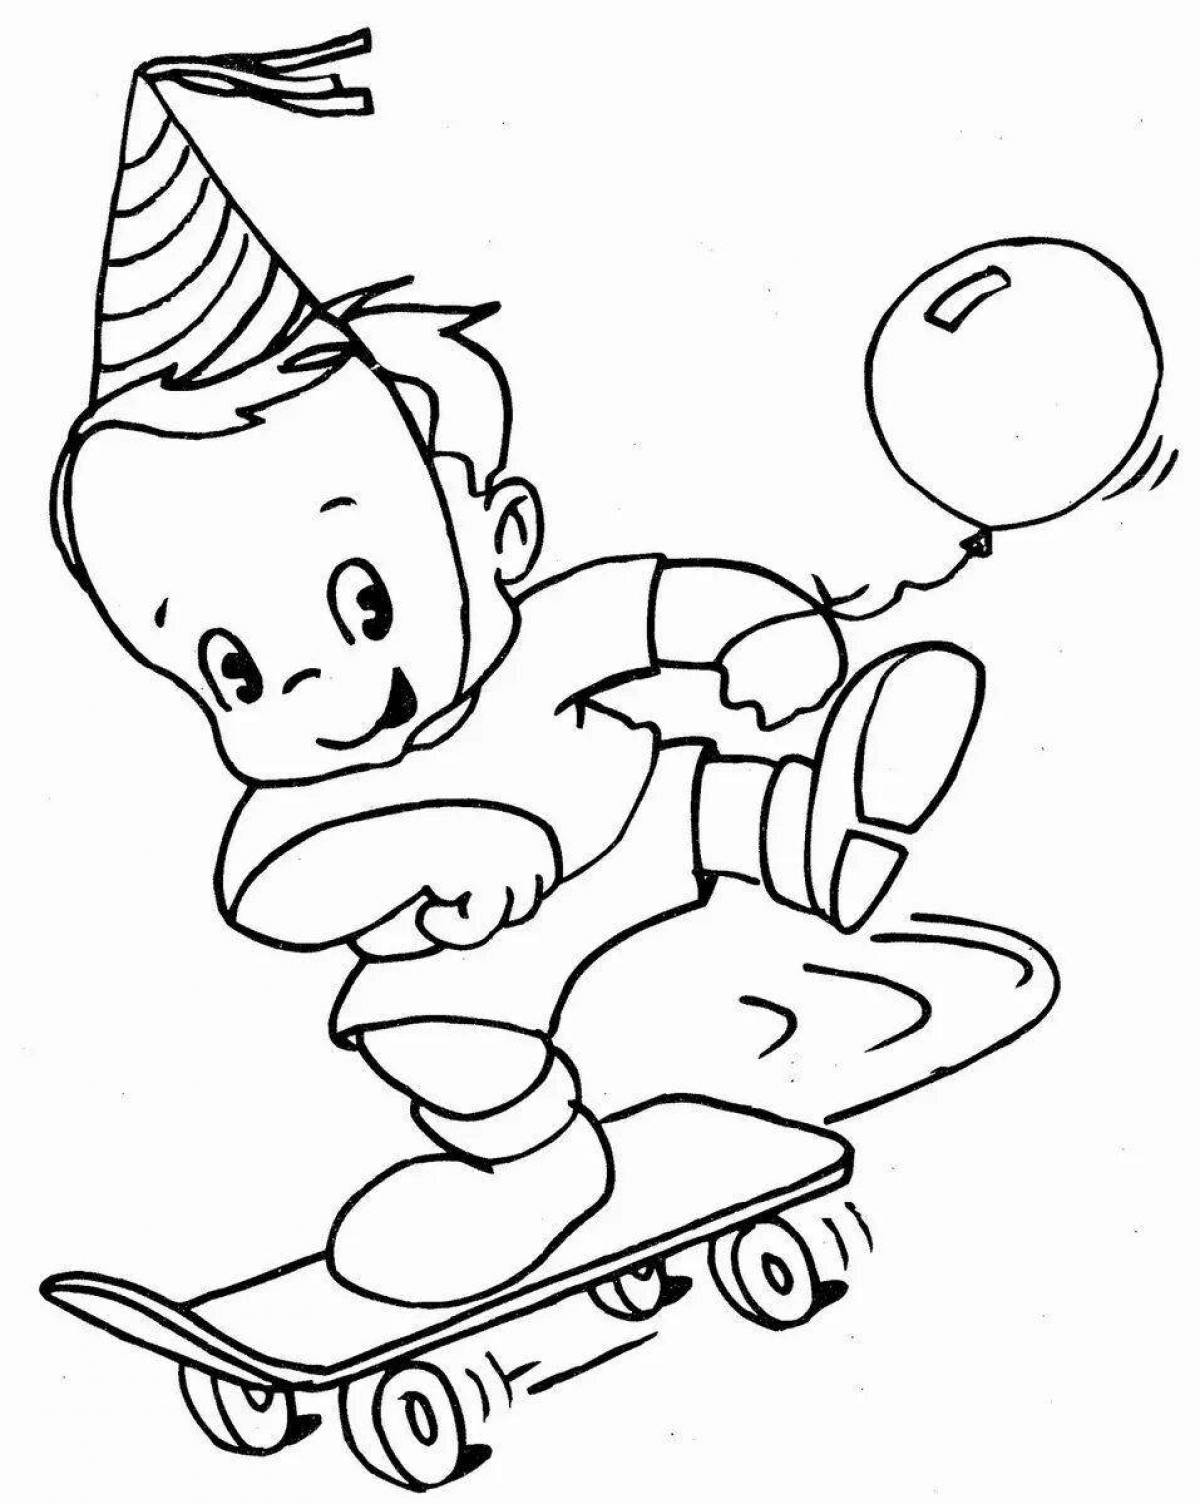 Coloring page confident skateboarder